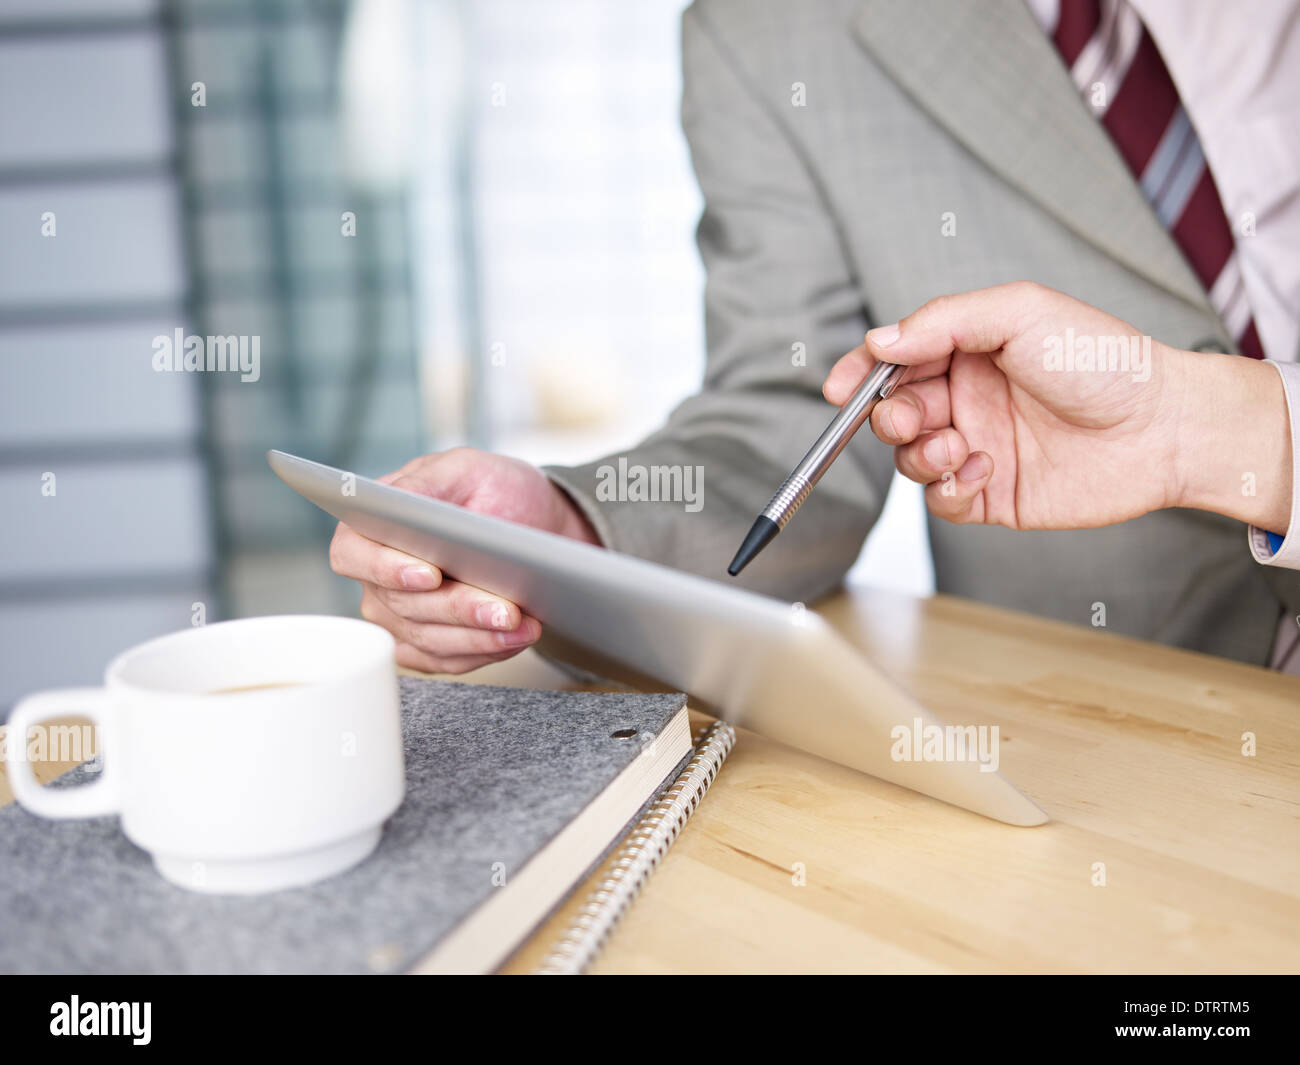 business discussion Stock Photo